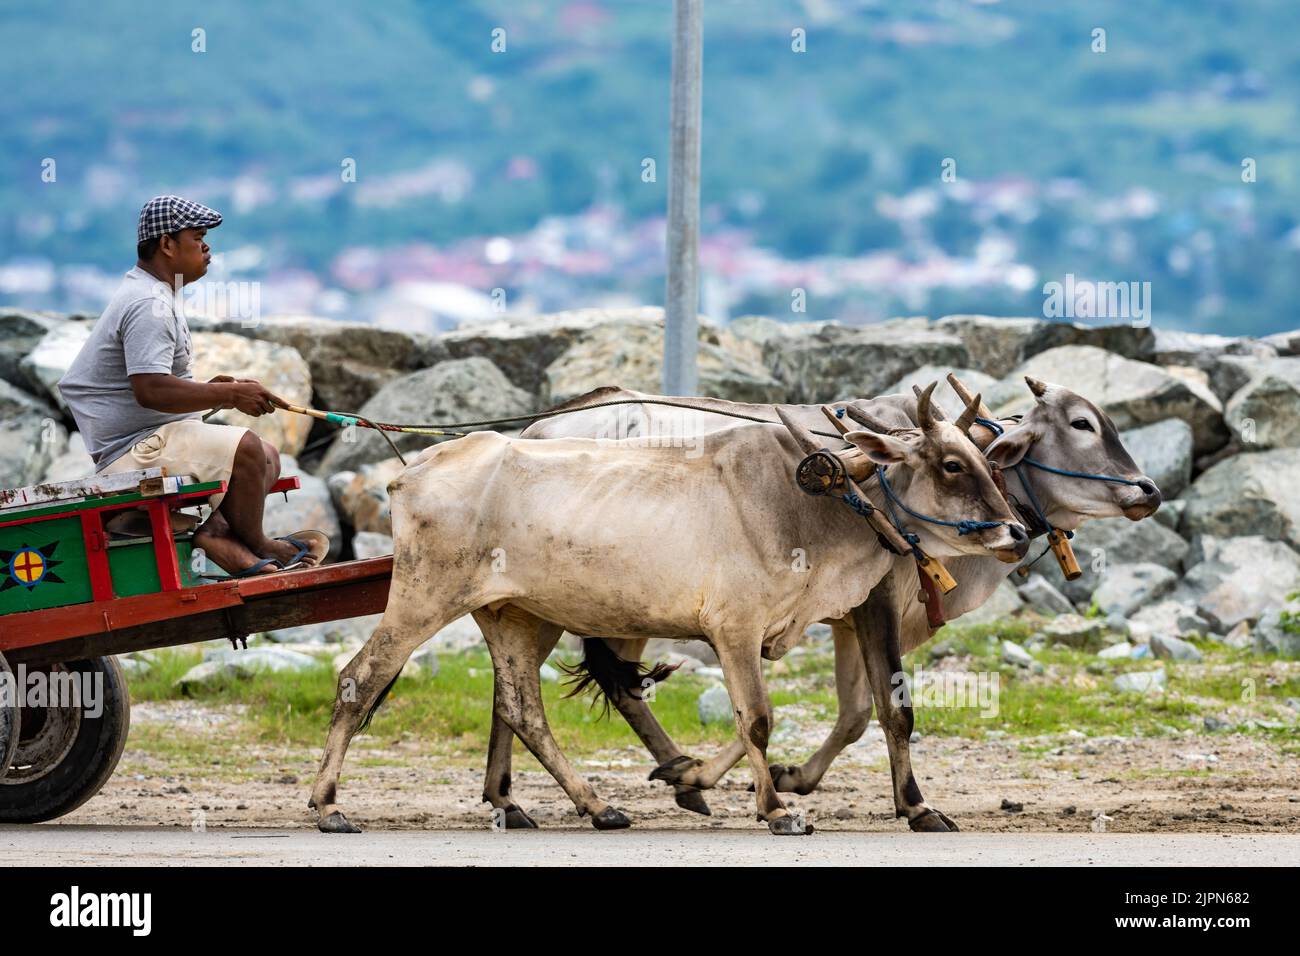 An Indonesian man drives an ox-drawn cart on the street of Palu. Sulawesi, Indonesia. Stock Photo